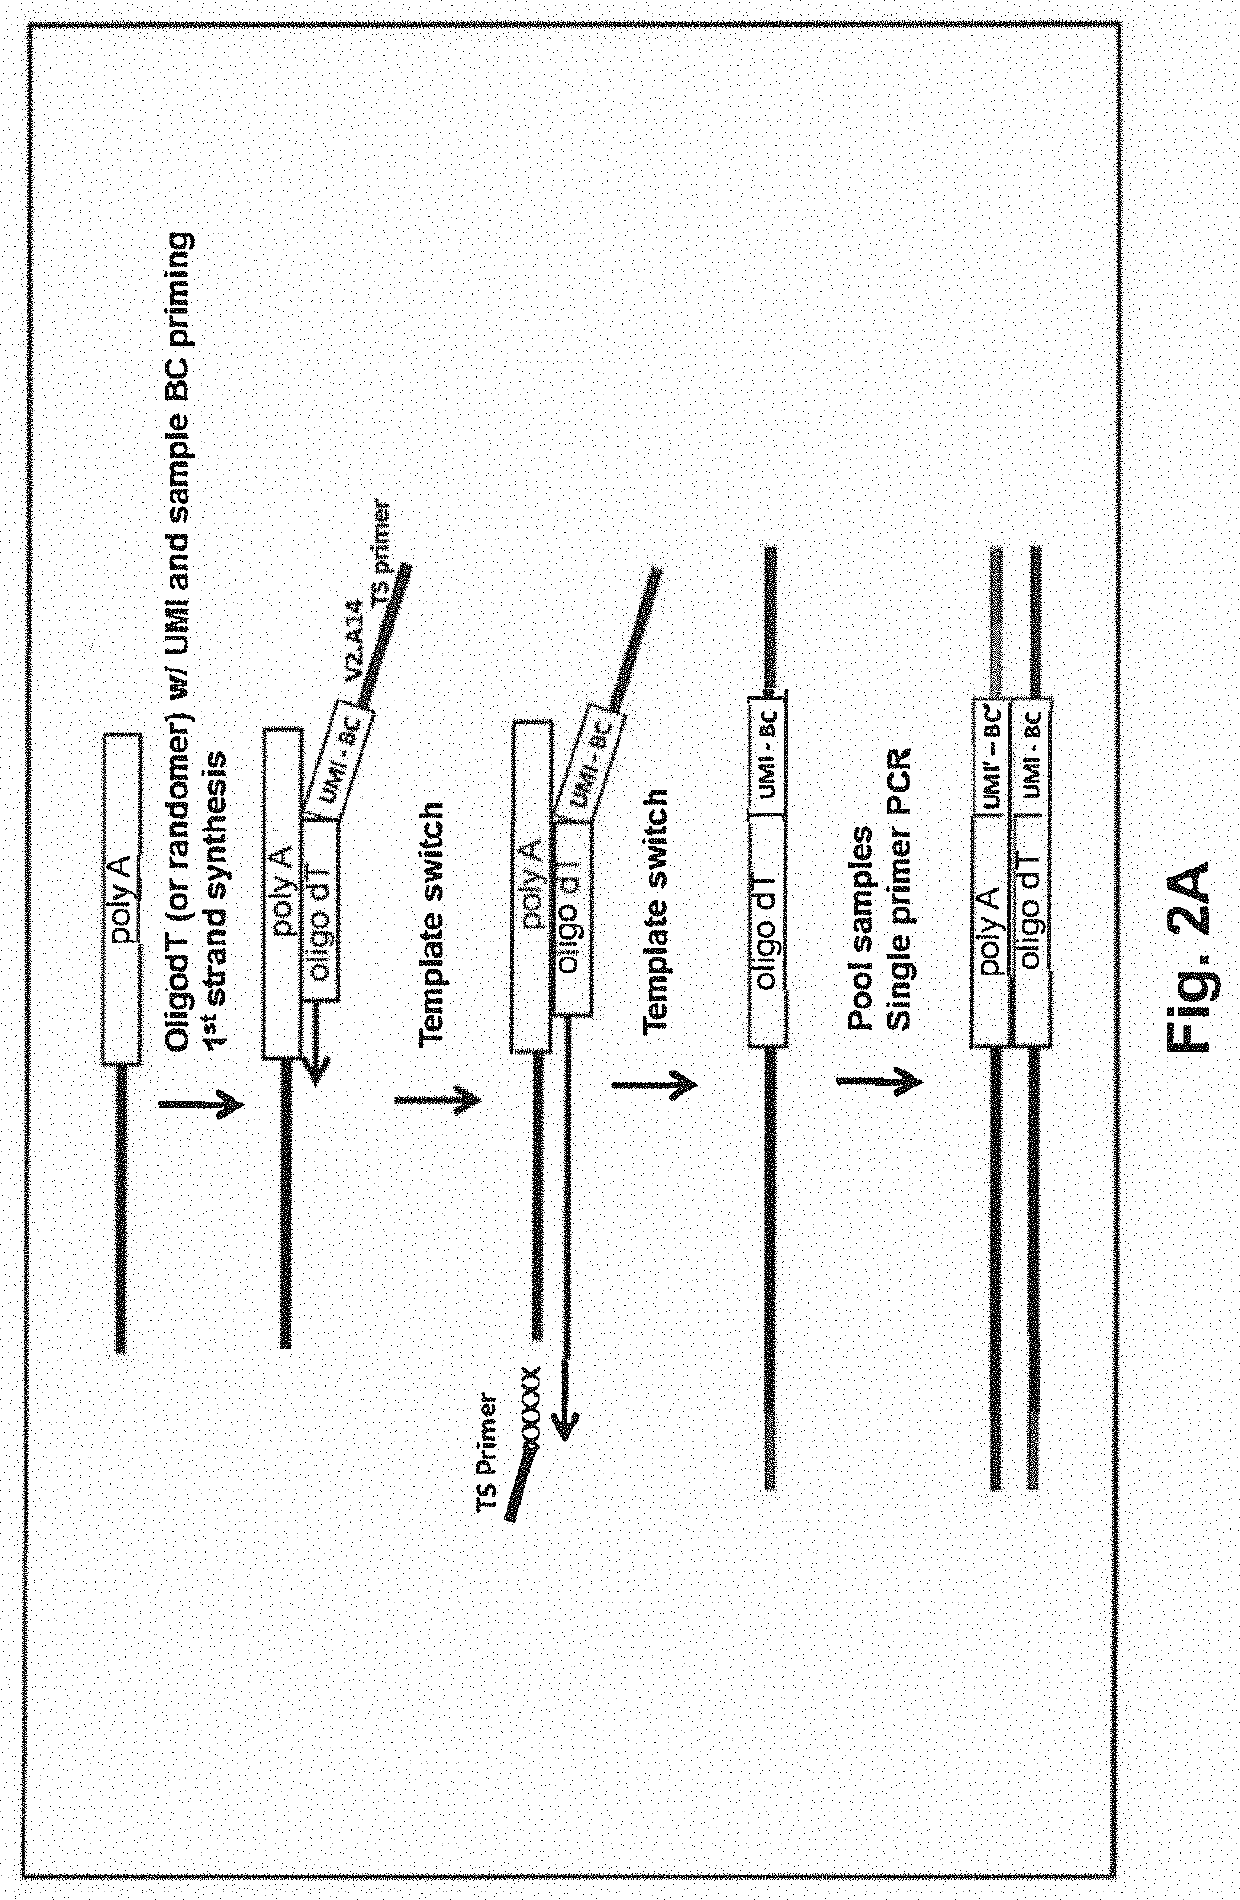 Multiplexed Single Cell Gene Expression Analysis Using Template Switch and Tagmentation